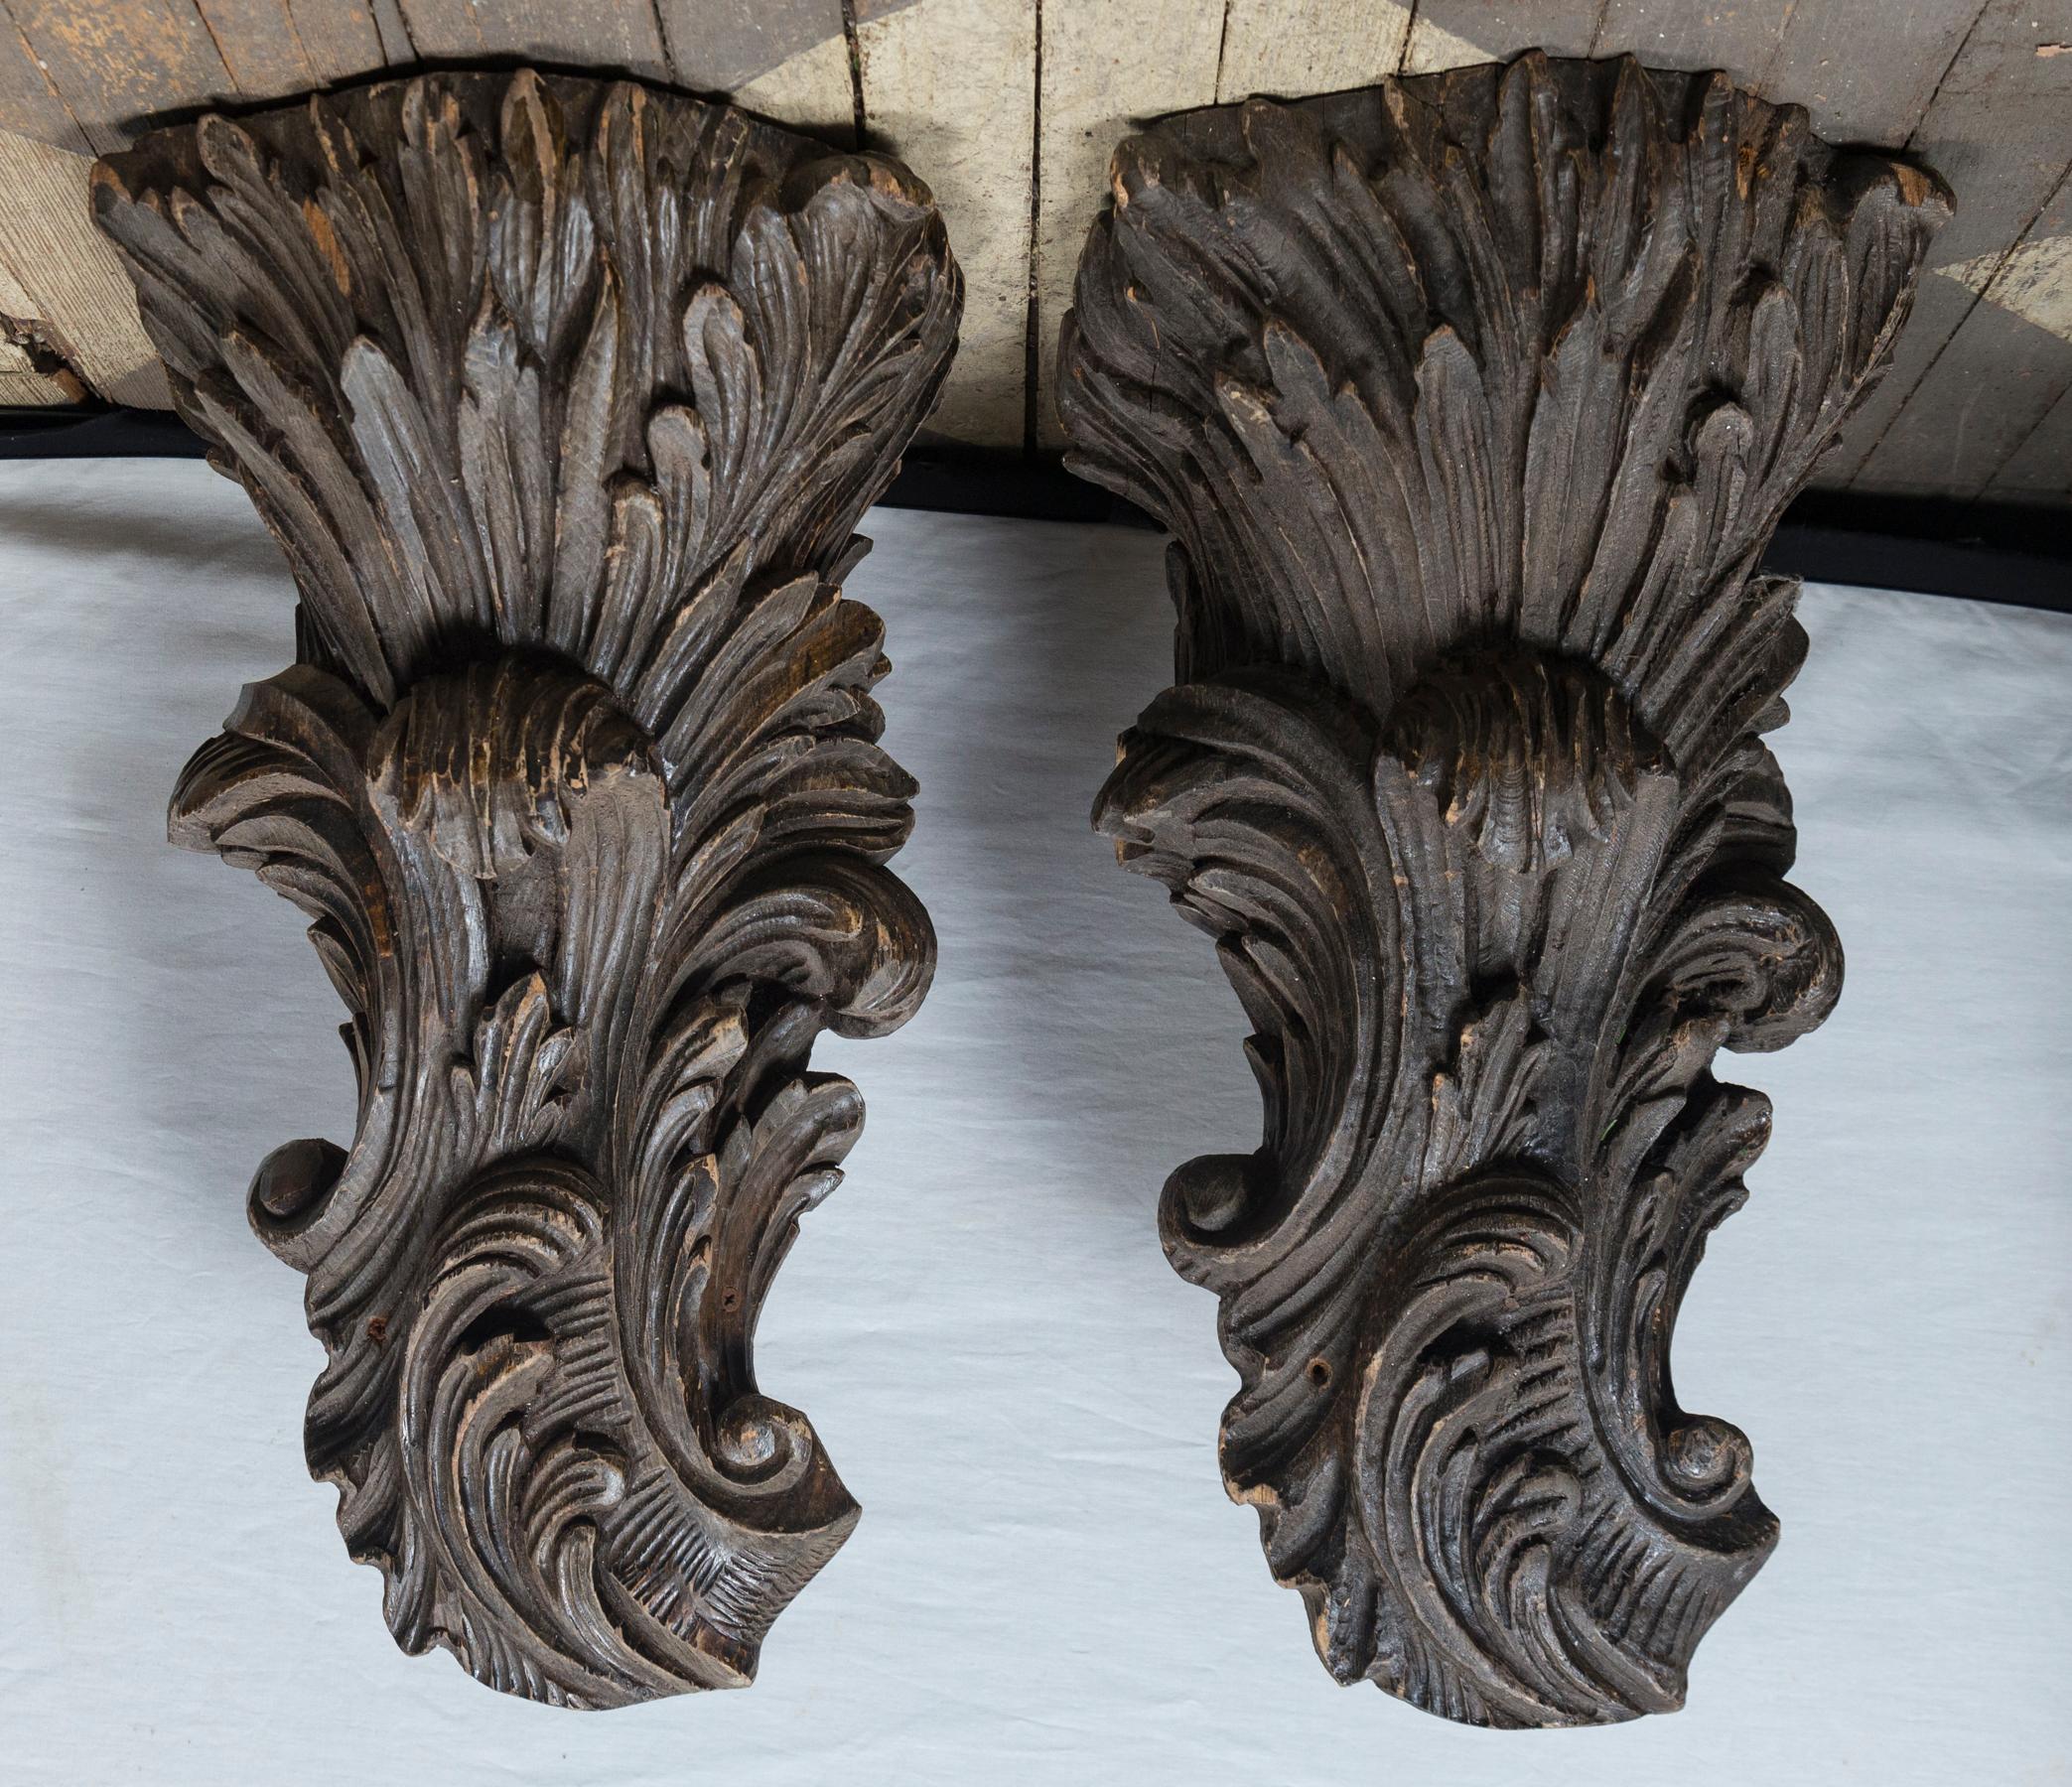 This large pair of hand carved wood brackets have great detailed scrolls and leaves. One appears to be made of one piece while the other is made of separate pieces of wood, glued together to make the whole much like butcherblock is fashioned. In the